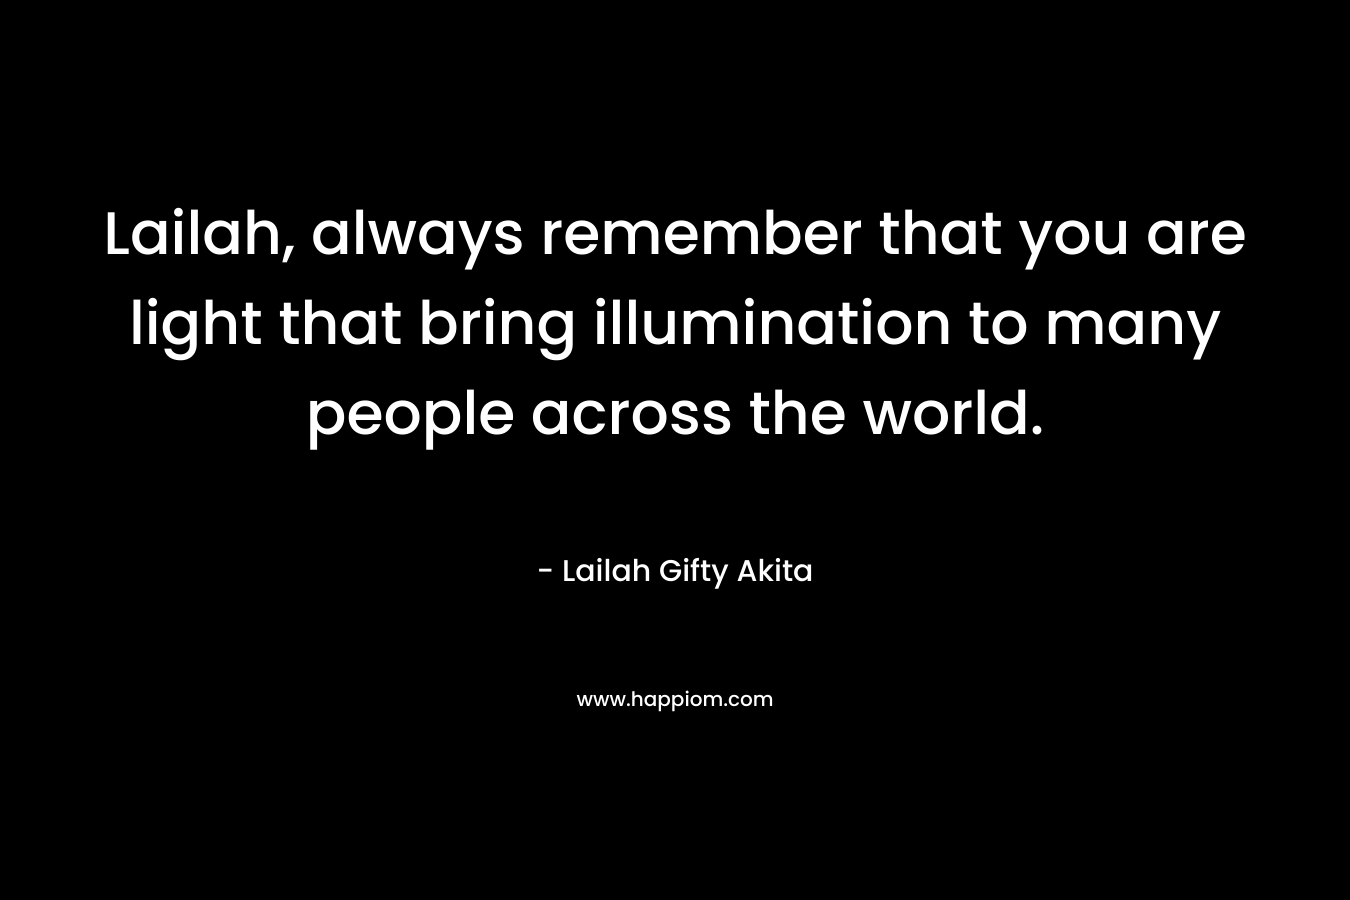 Lailah, always remember that you are light that bring illumination to many people across the world. – Lailah Gifty Akita